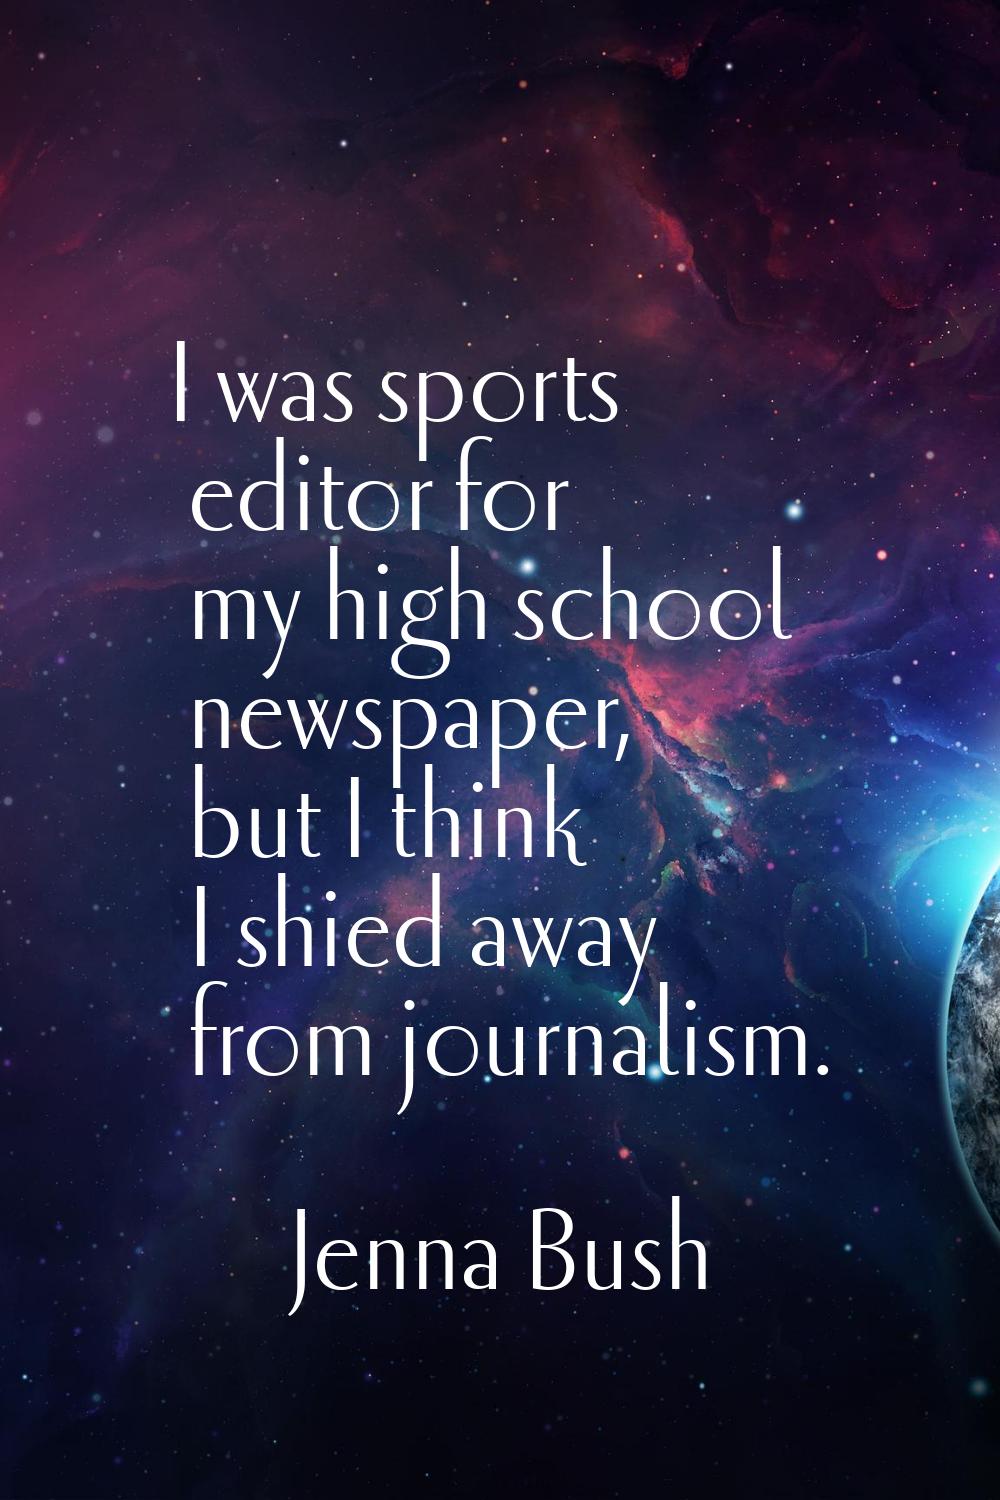 I was sports editor for my high school newspaper, but I think I shied away from journalism.